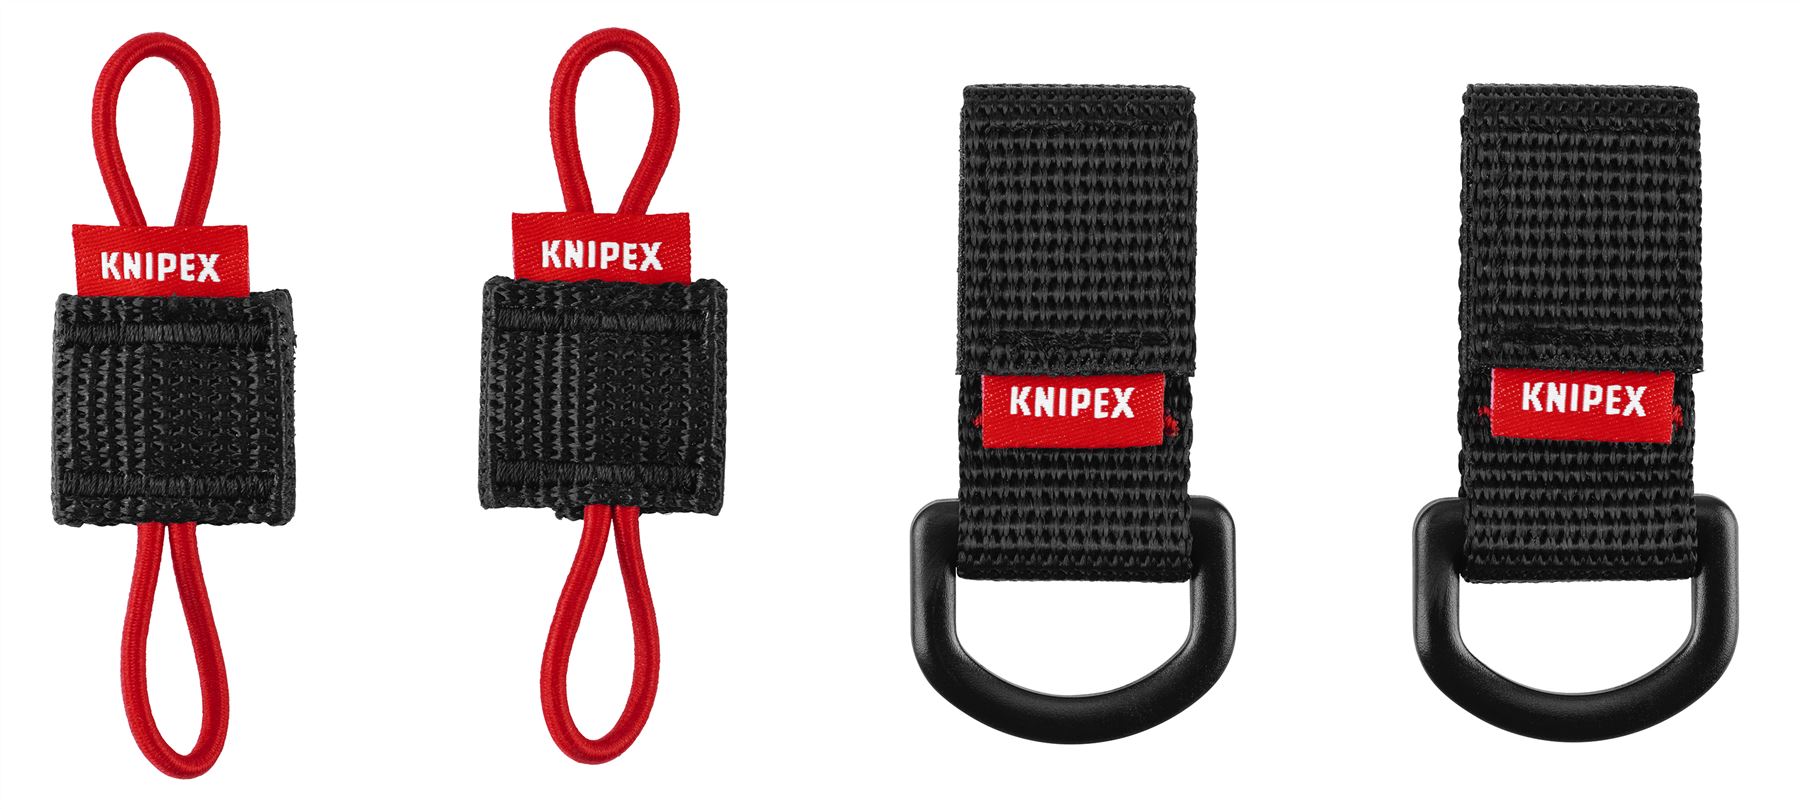 KNIPEX Adapter Strap Set of 4 for 00 21 50 LE Modular X18 Backpack 00 21 50 V01